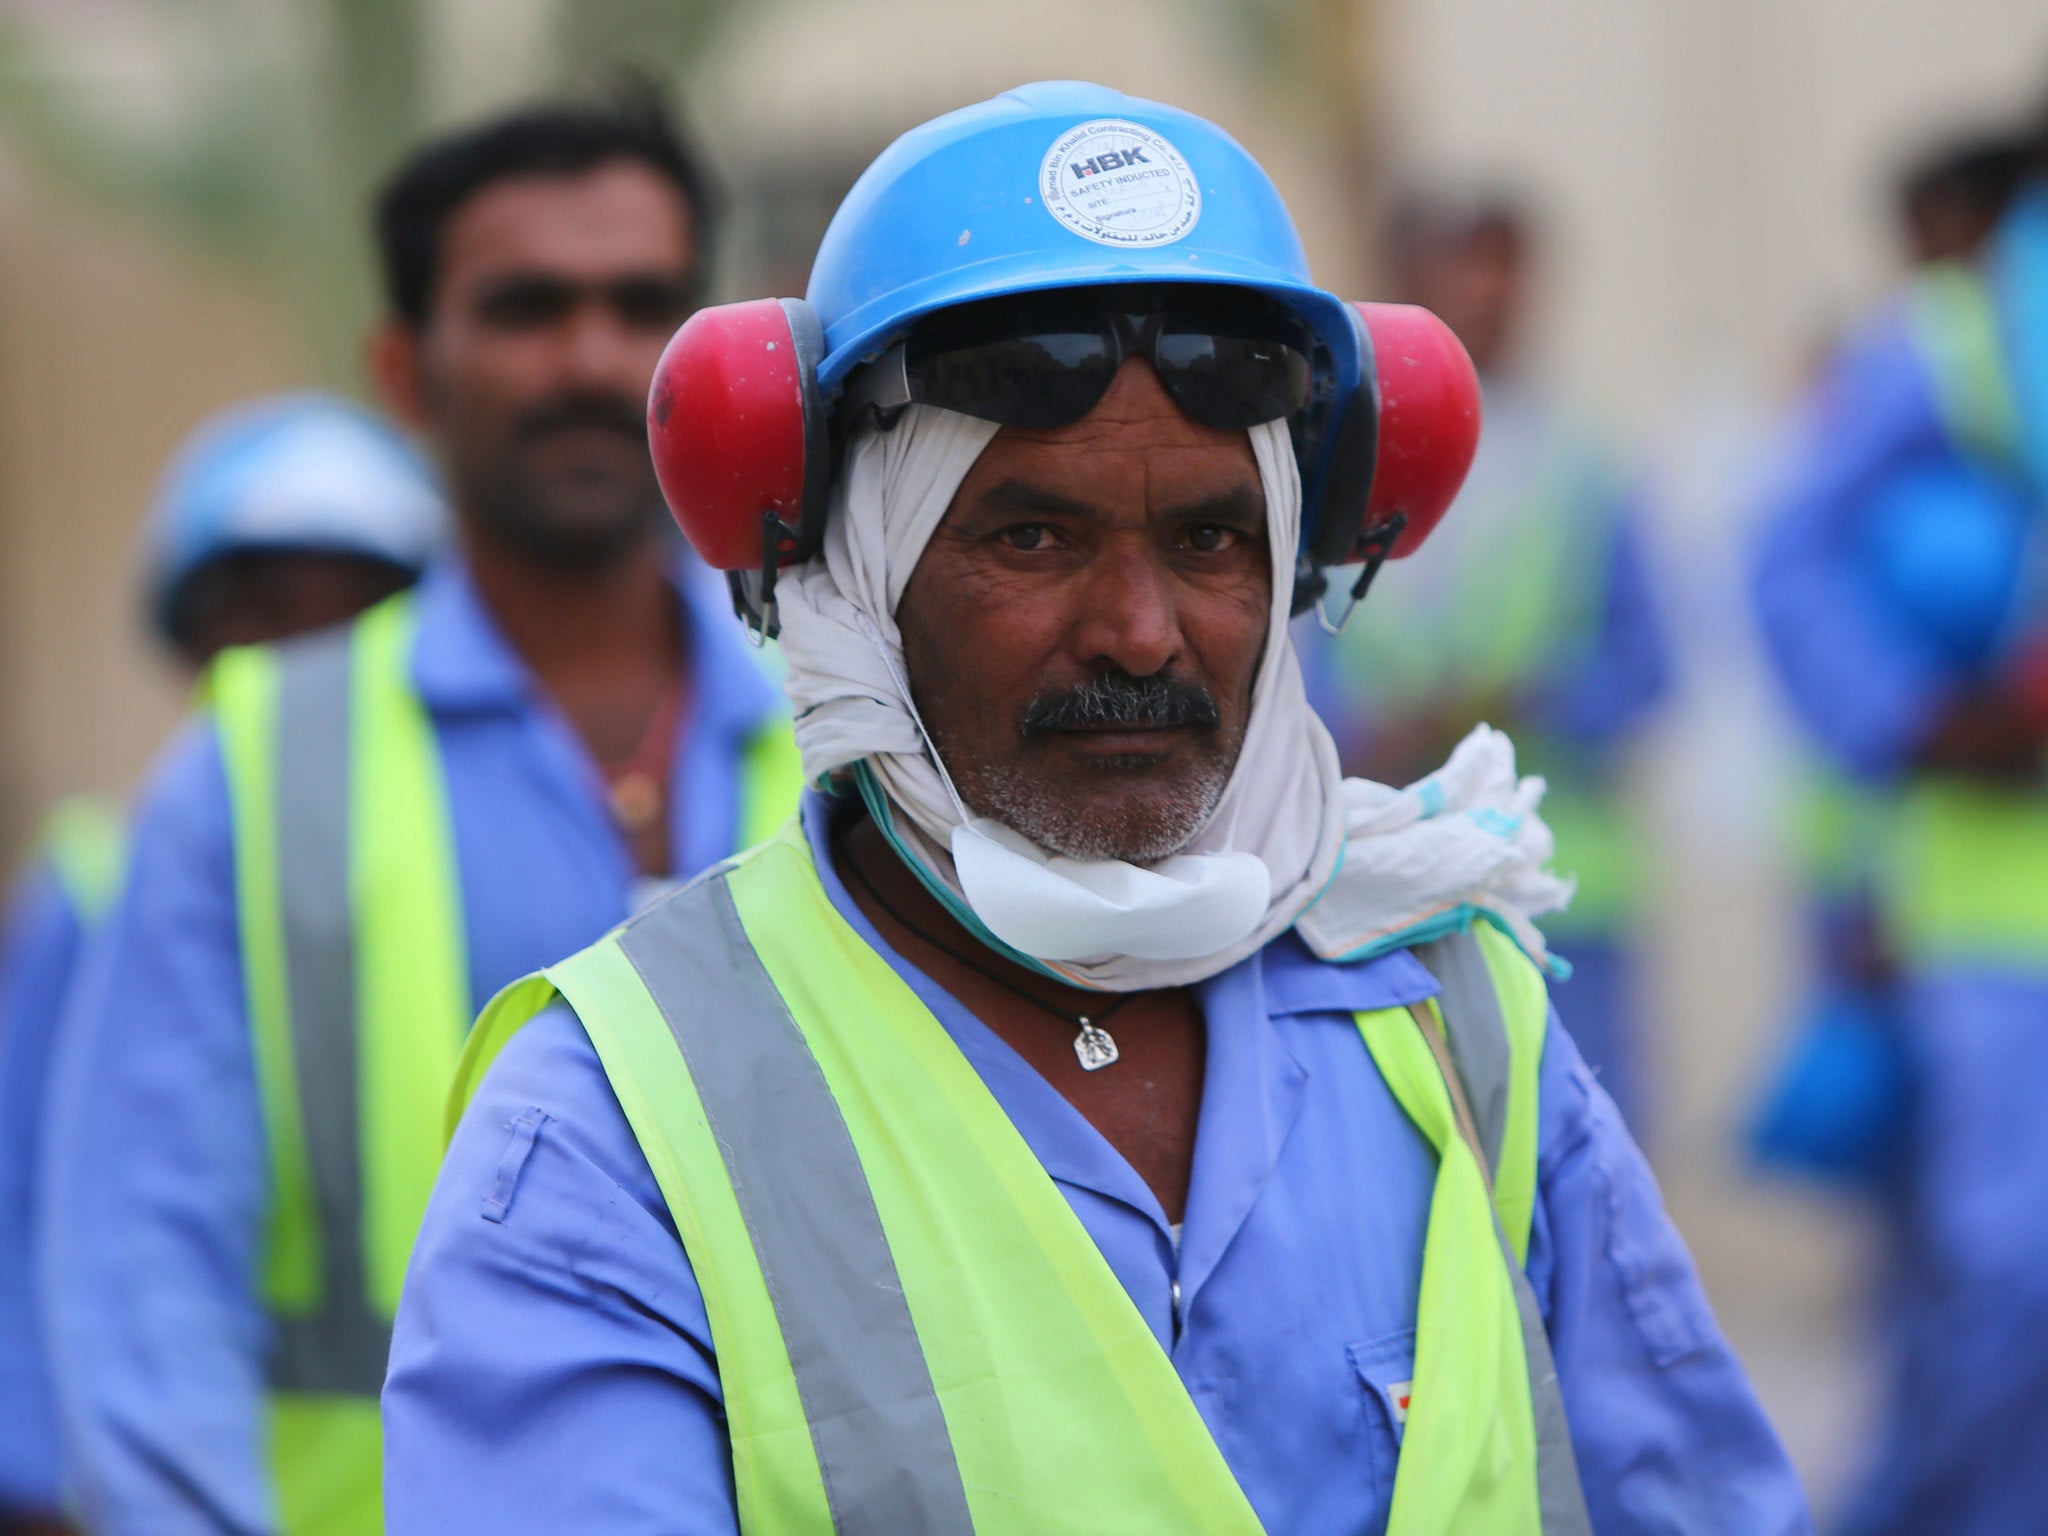 Rights groups have strongly criticised Qatar over the living and working conditions of its migrant workforce